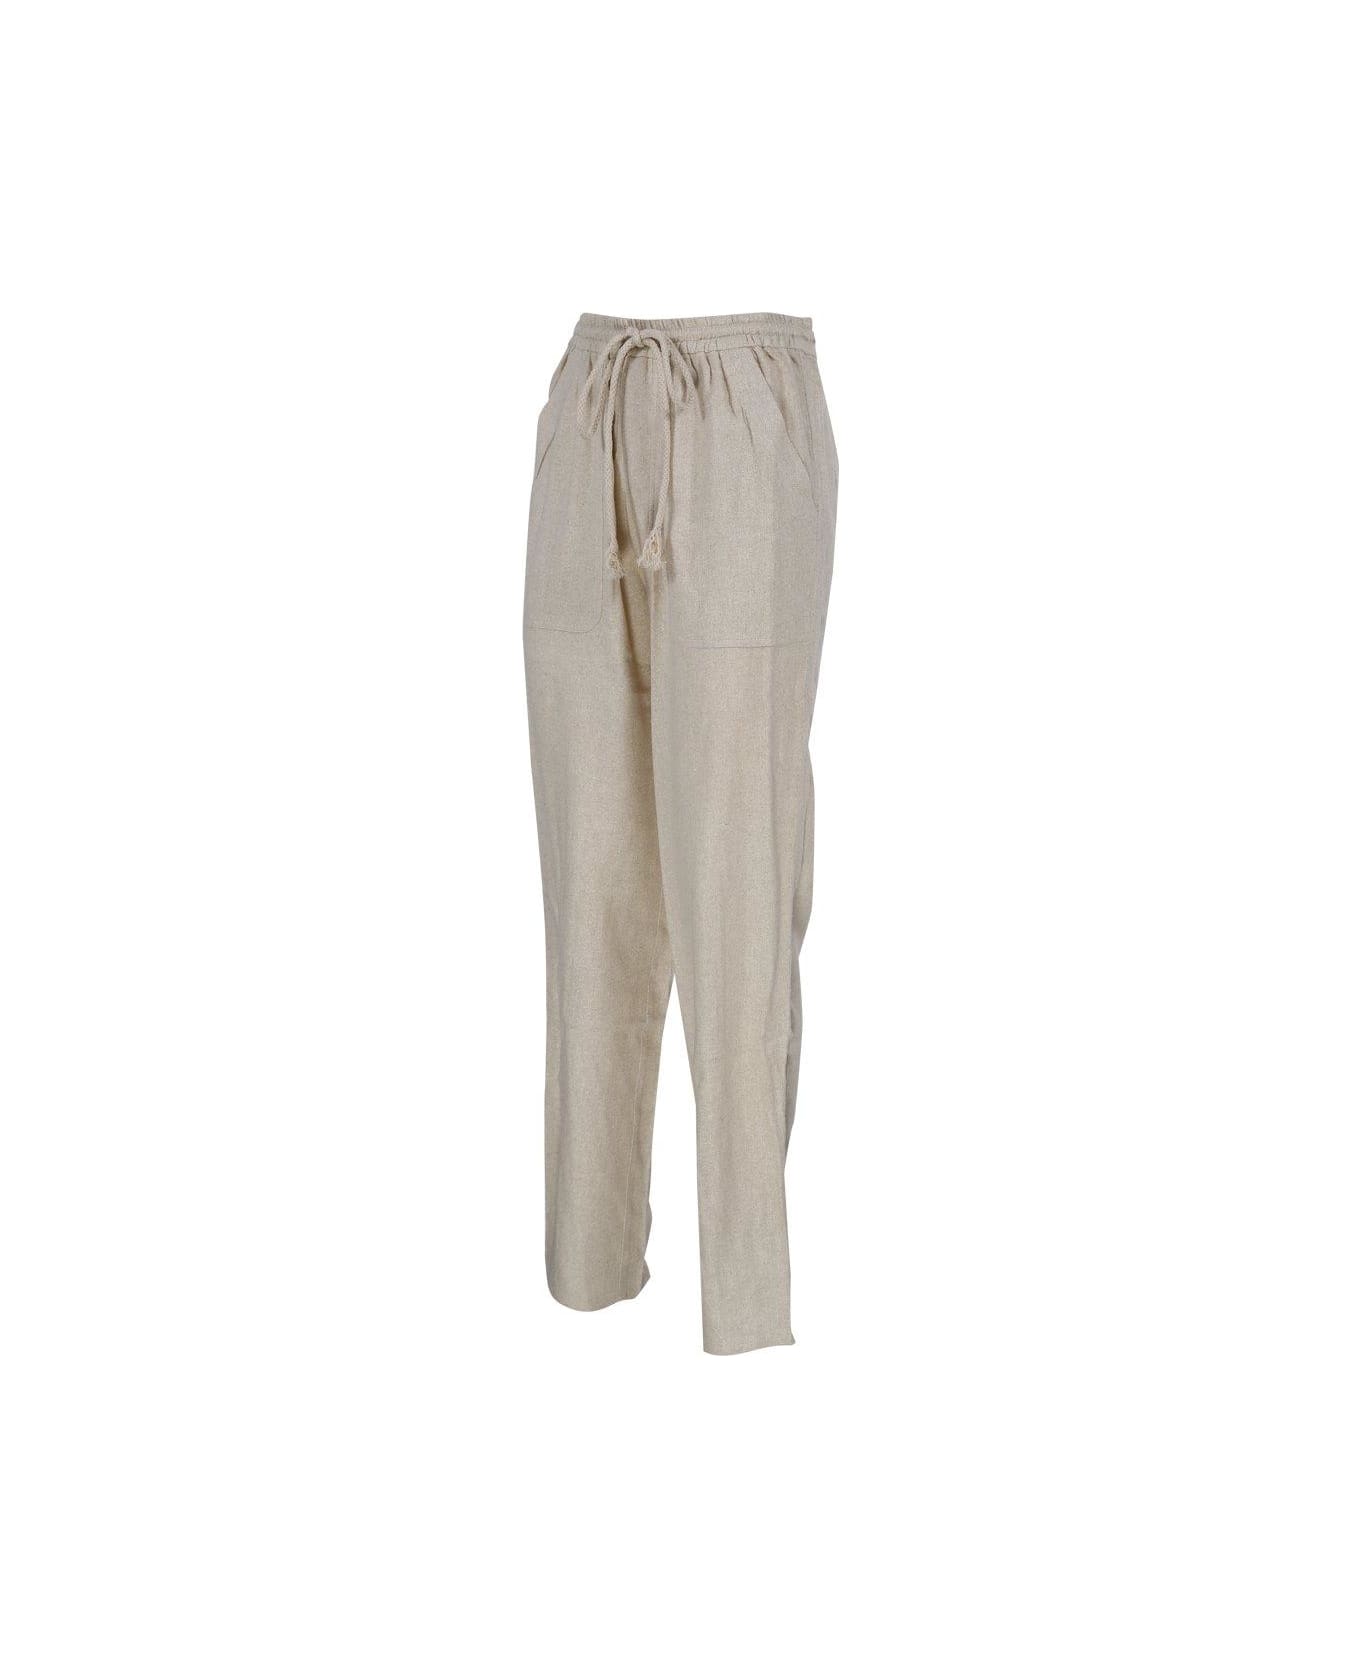 Marant Étoile Mid-rise Drawstring Tapered Trousers - Beige